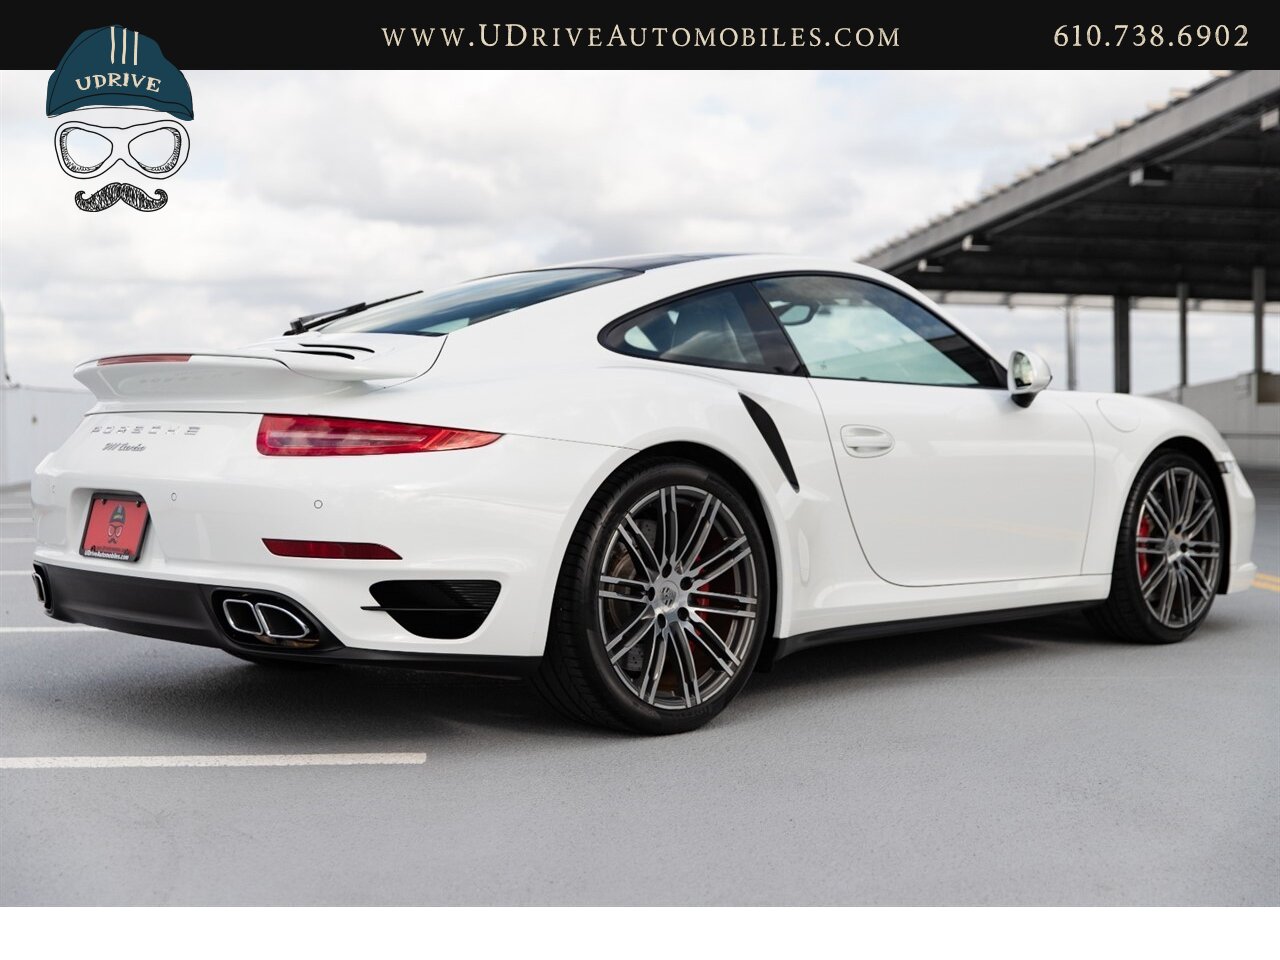 2014 Porsche 911 Turbo 12k Miles White over Black Chrono Rear Wiper  Sport Seats 20in Turbo Whls Sunroof Red Belts - Photo 17 - West Chester, PA 19382